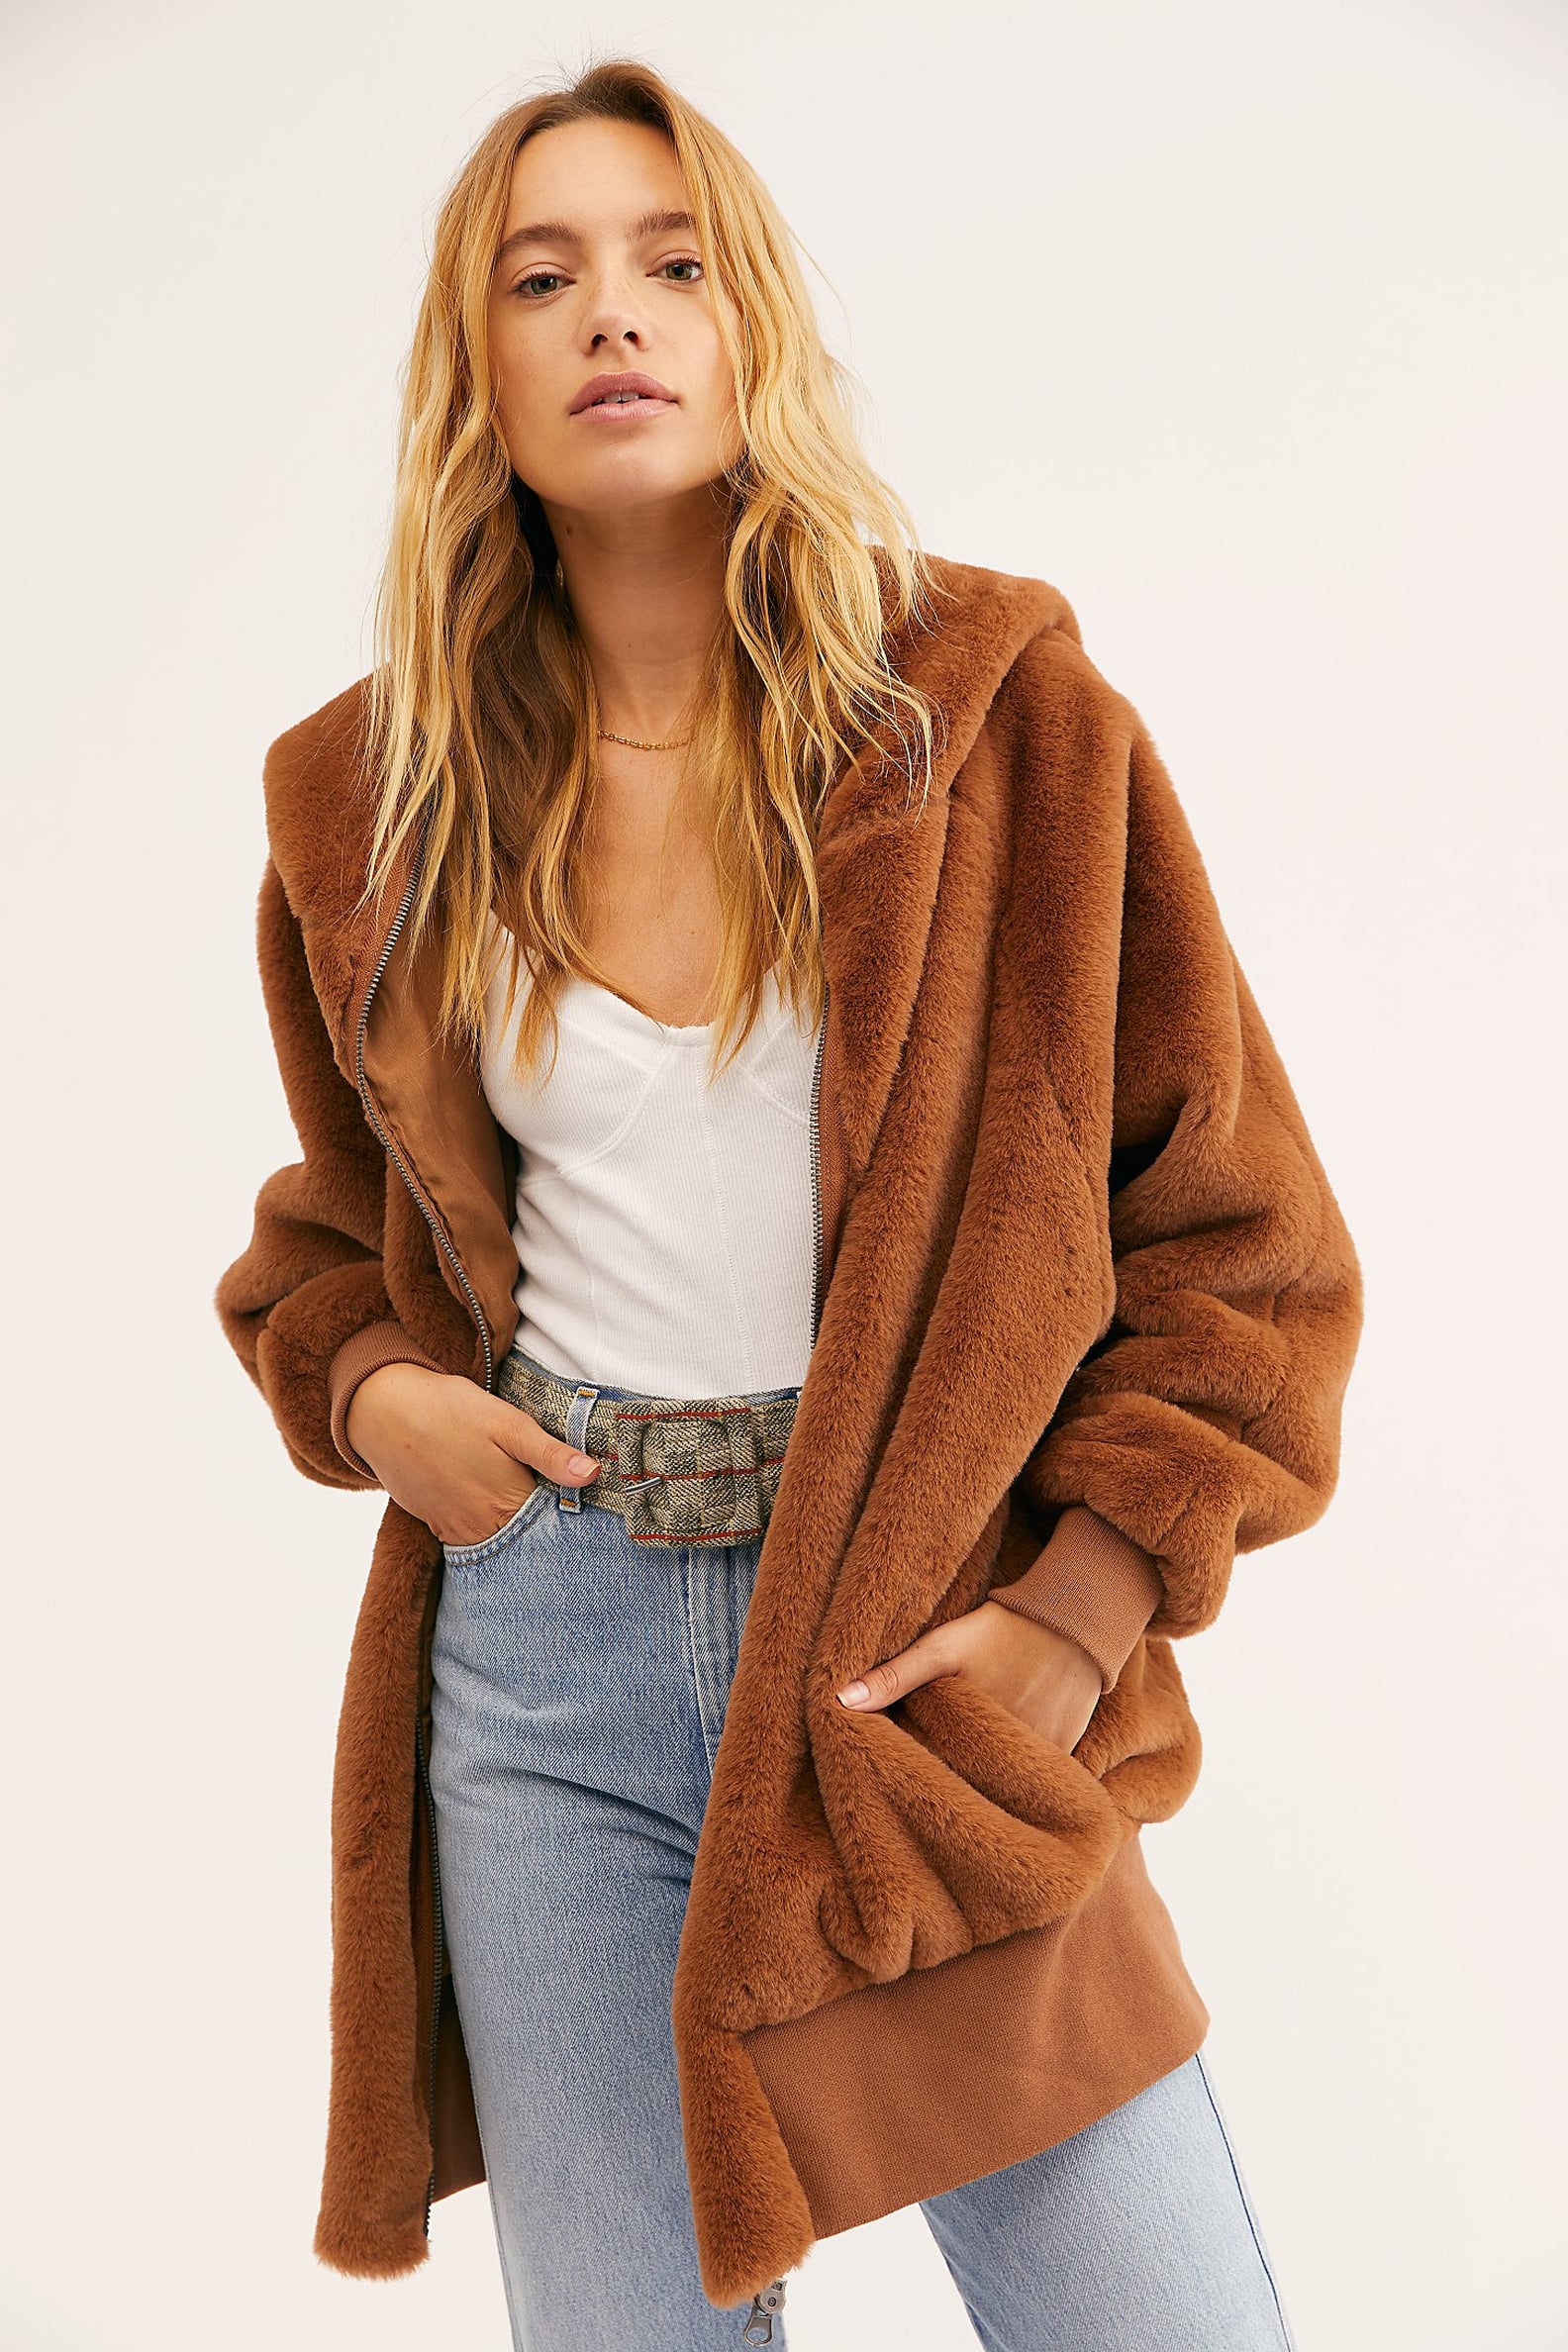 Most Stylish Jackets and Coats From Free People | POPSUGAR Fashion